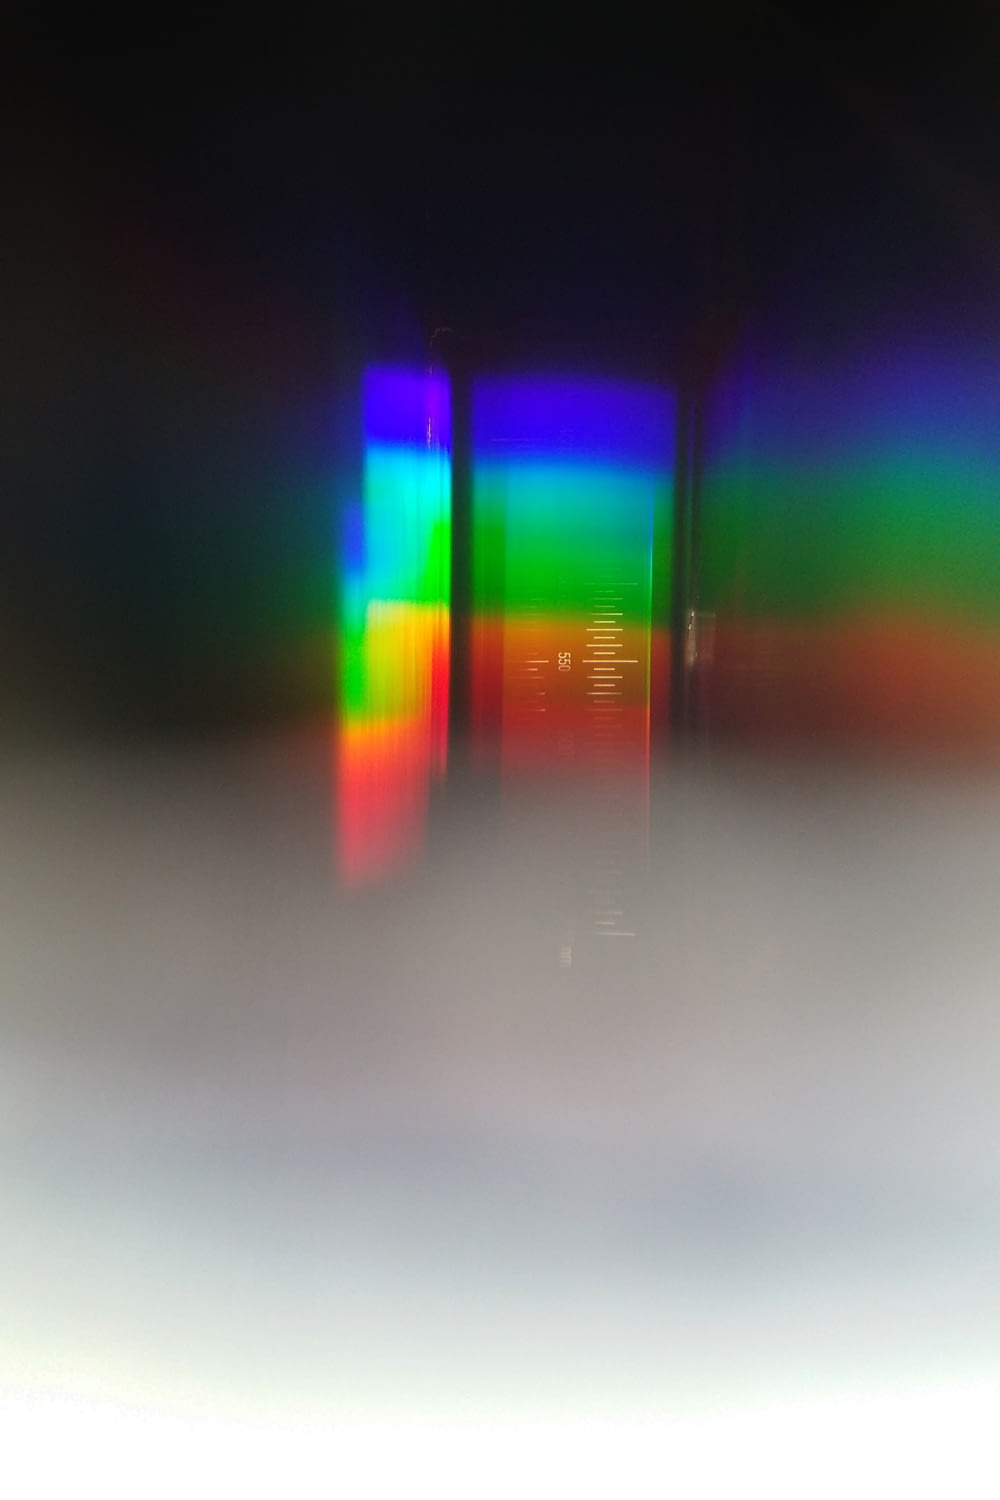 a blurry photo of a cell phone with a colorful screen